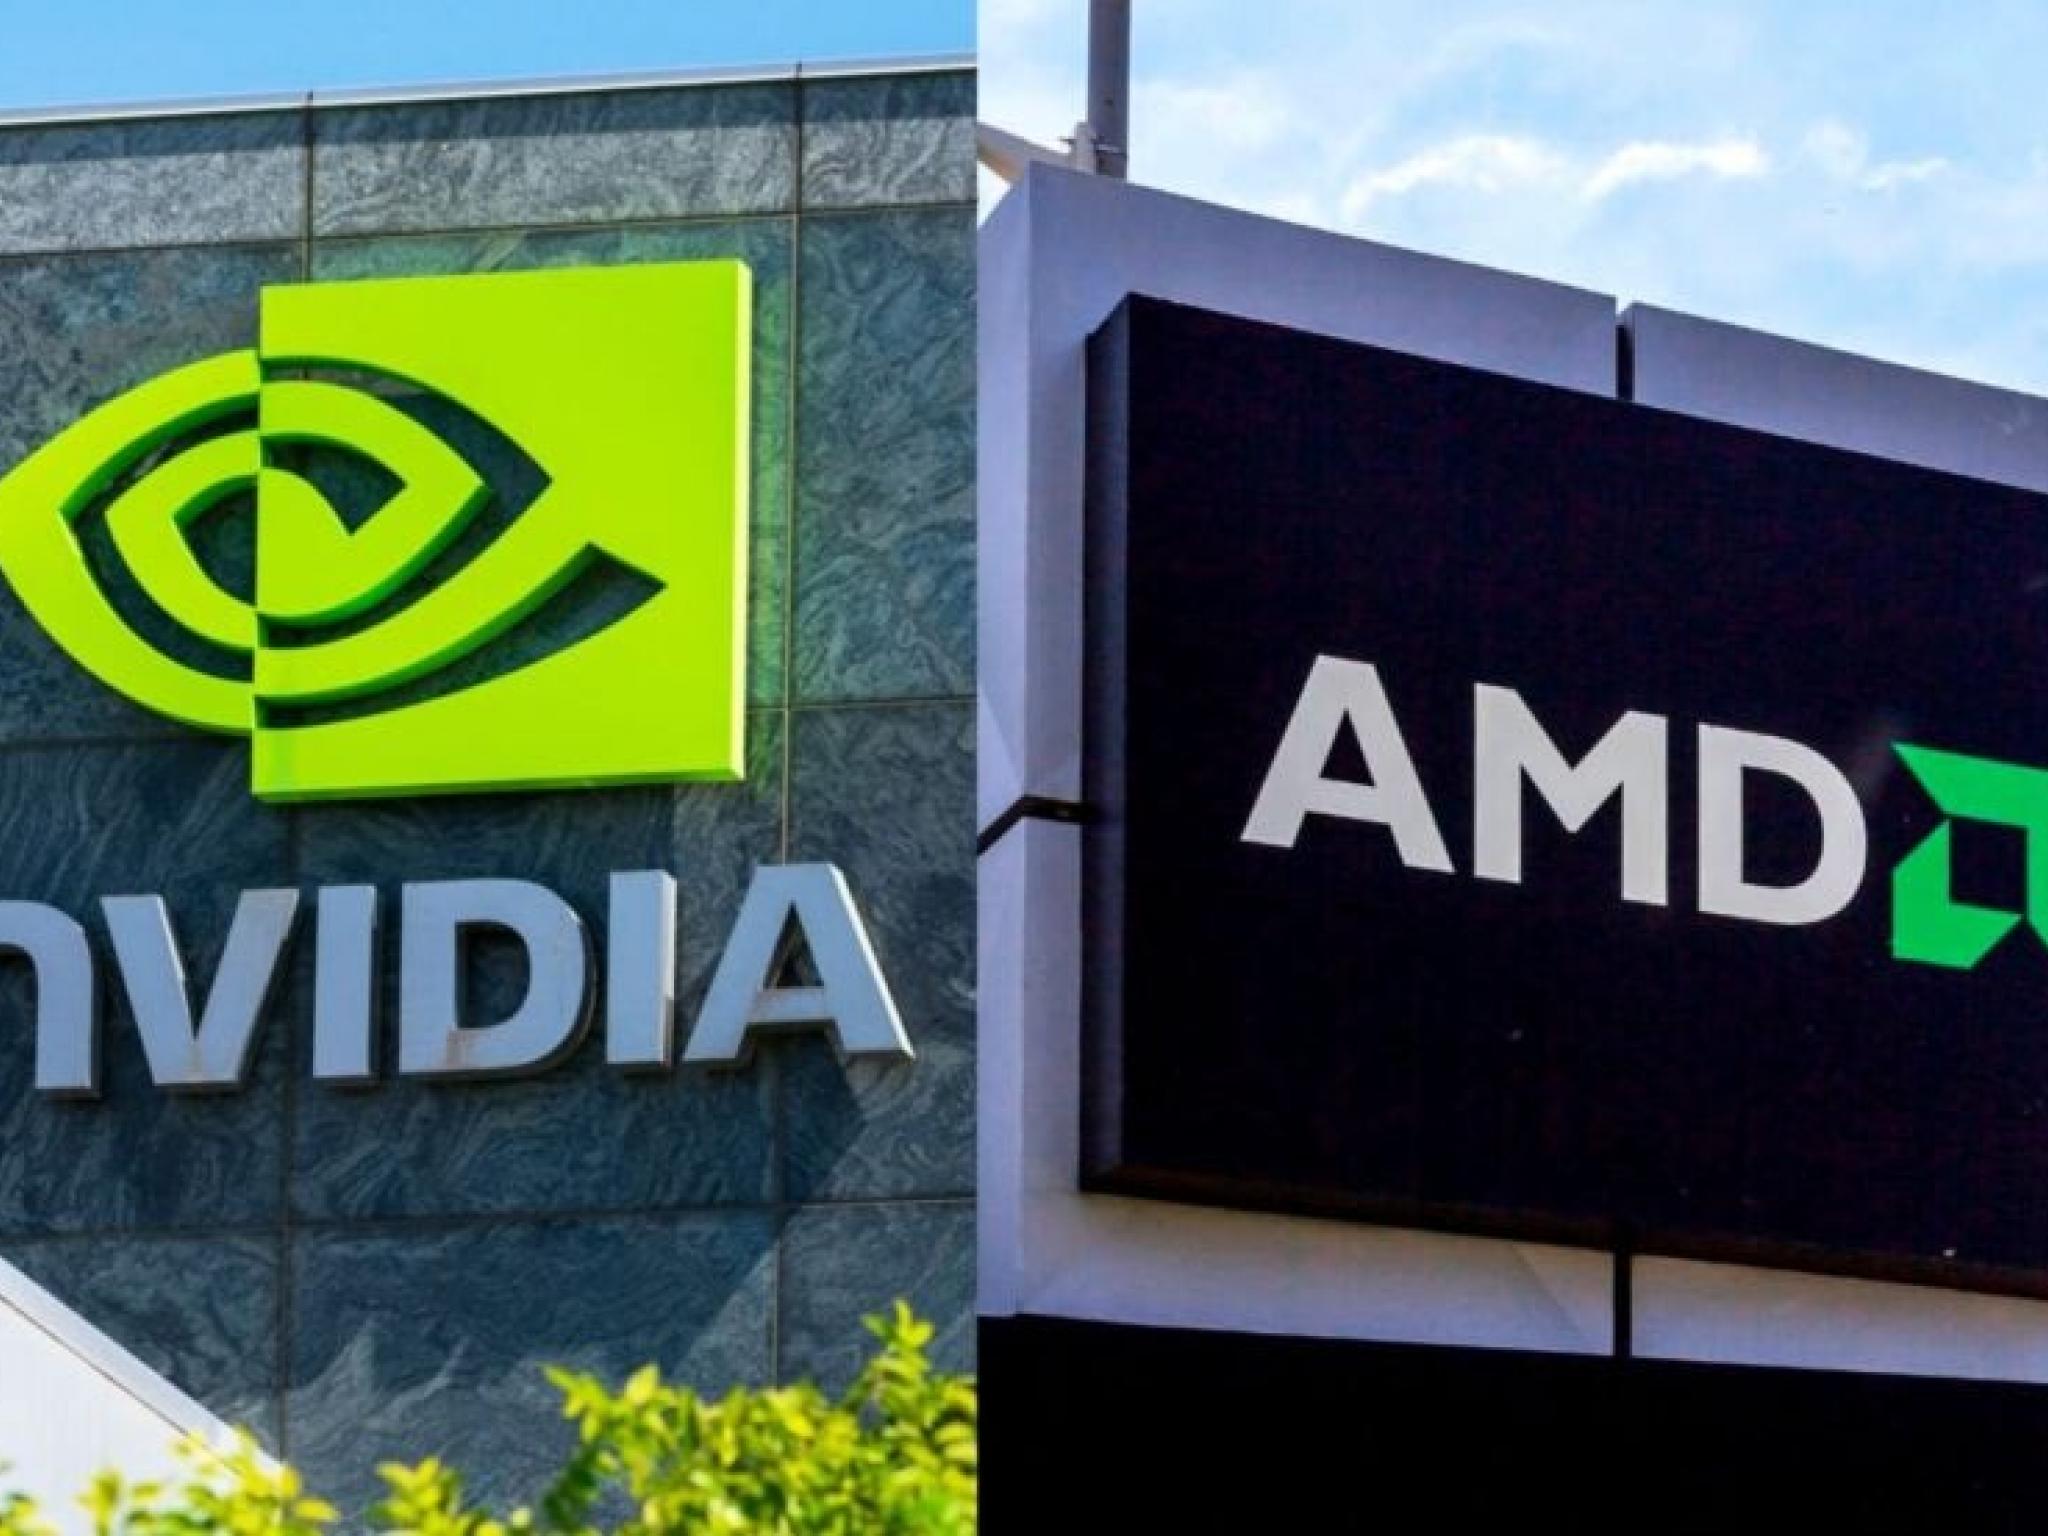  whats-going-on-with-nvidia-and-amd-stocks-on-thursday 